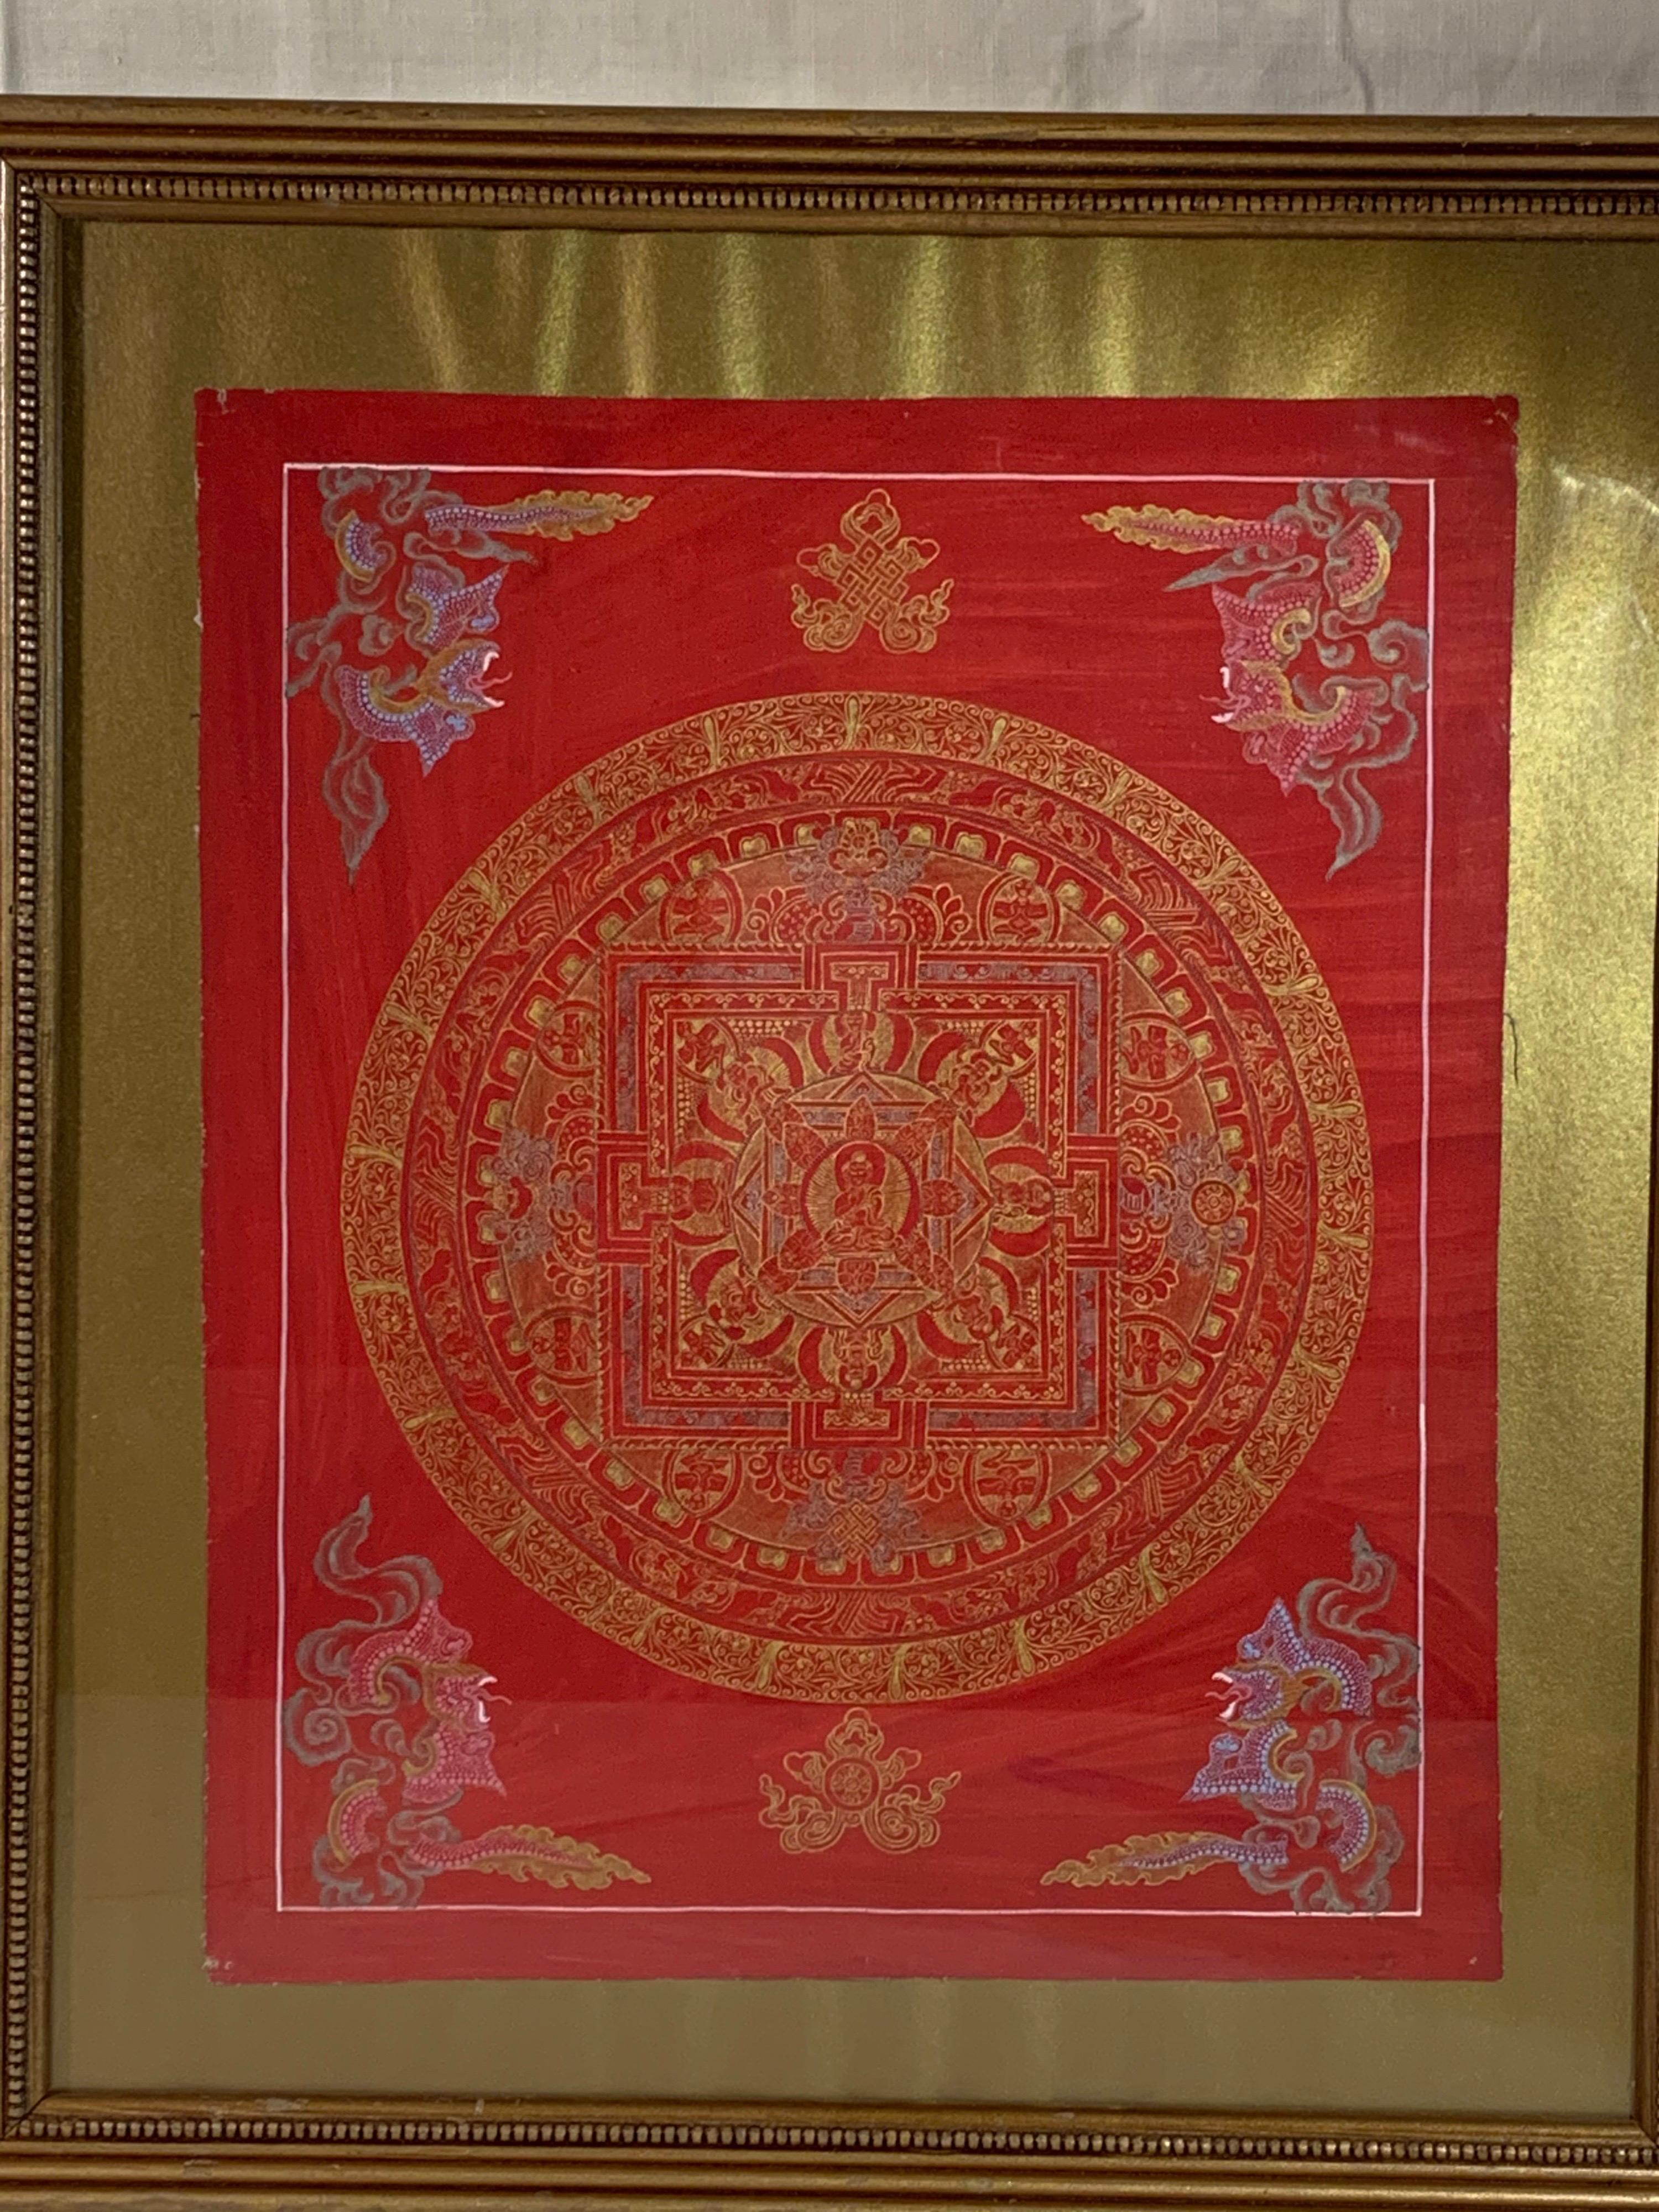 Framed Hand Painted Original Mandala Thangka with 24K Gold on Canvas - Other Art Style Mixed Media Art by Unknown